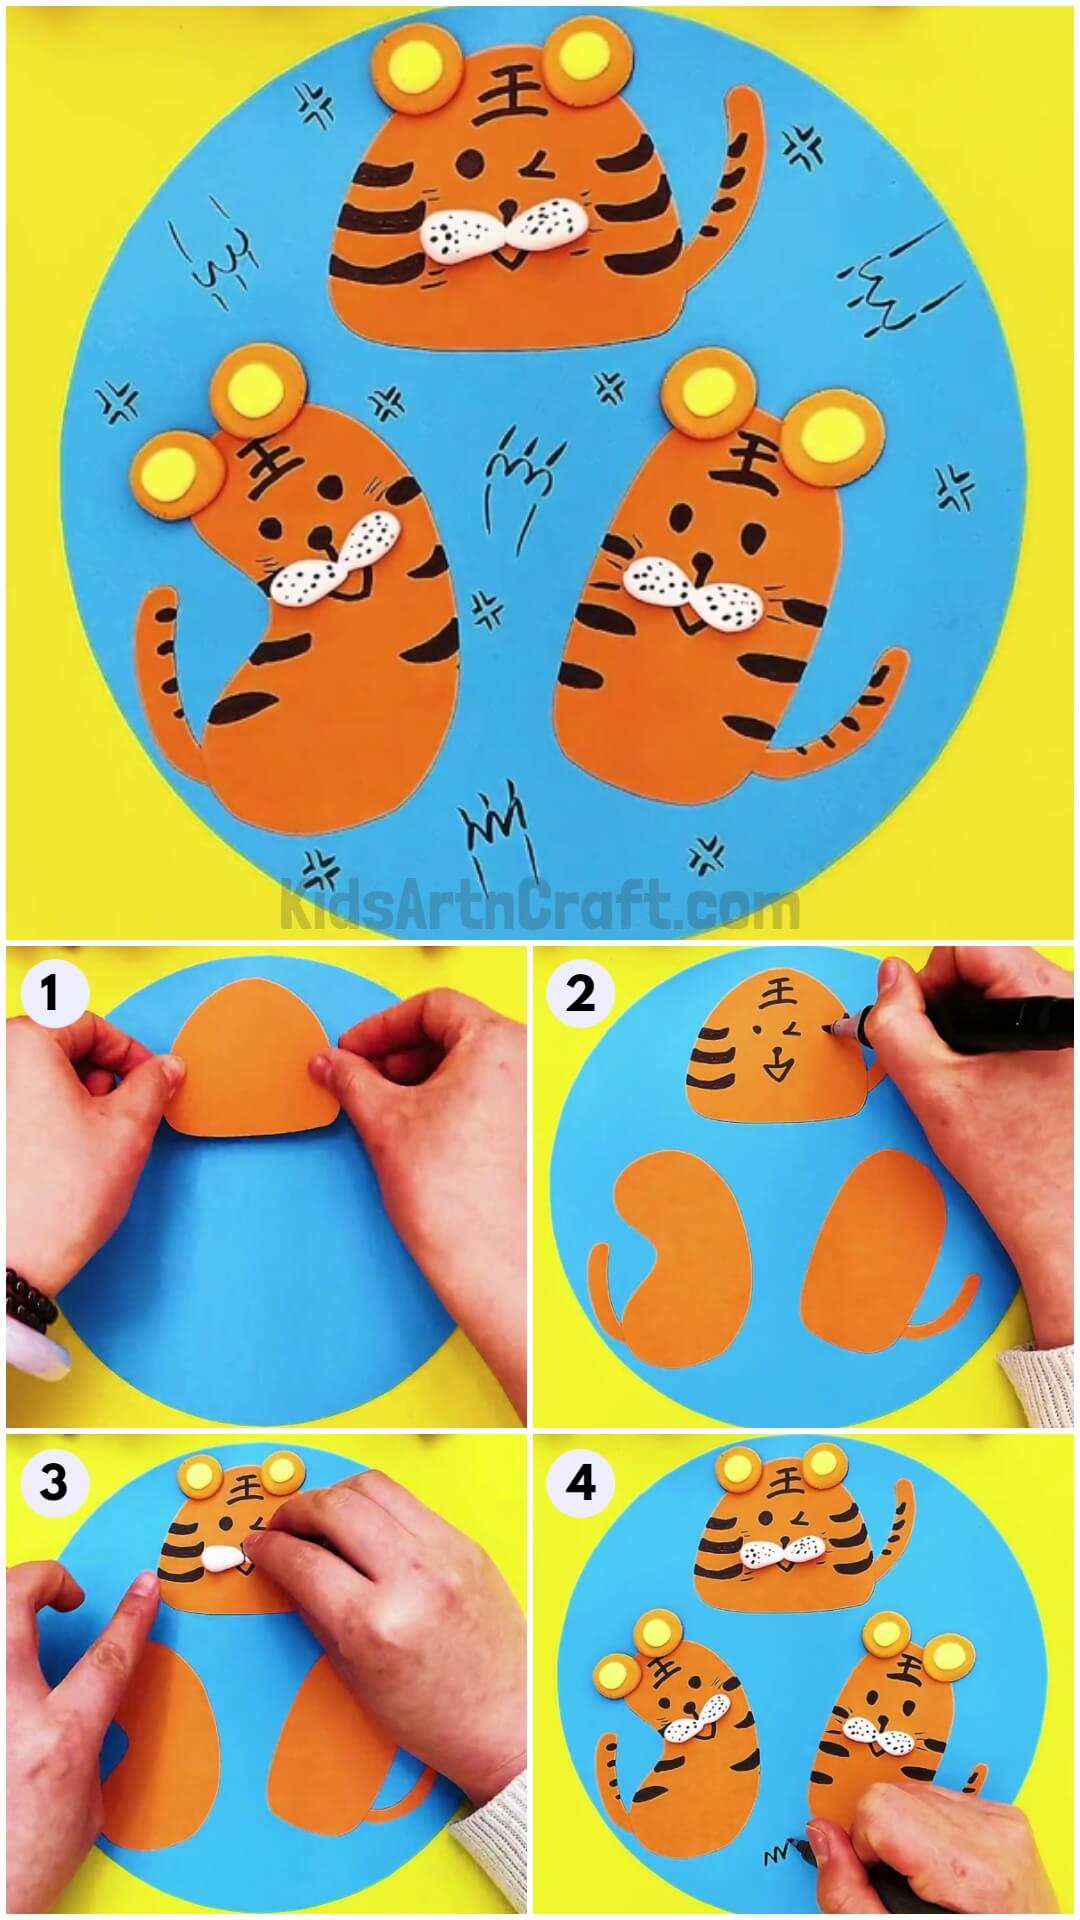 Cute Tigers Paper Craft Step by Step Instructions